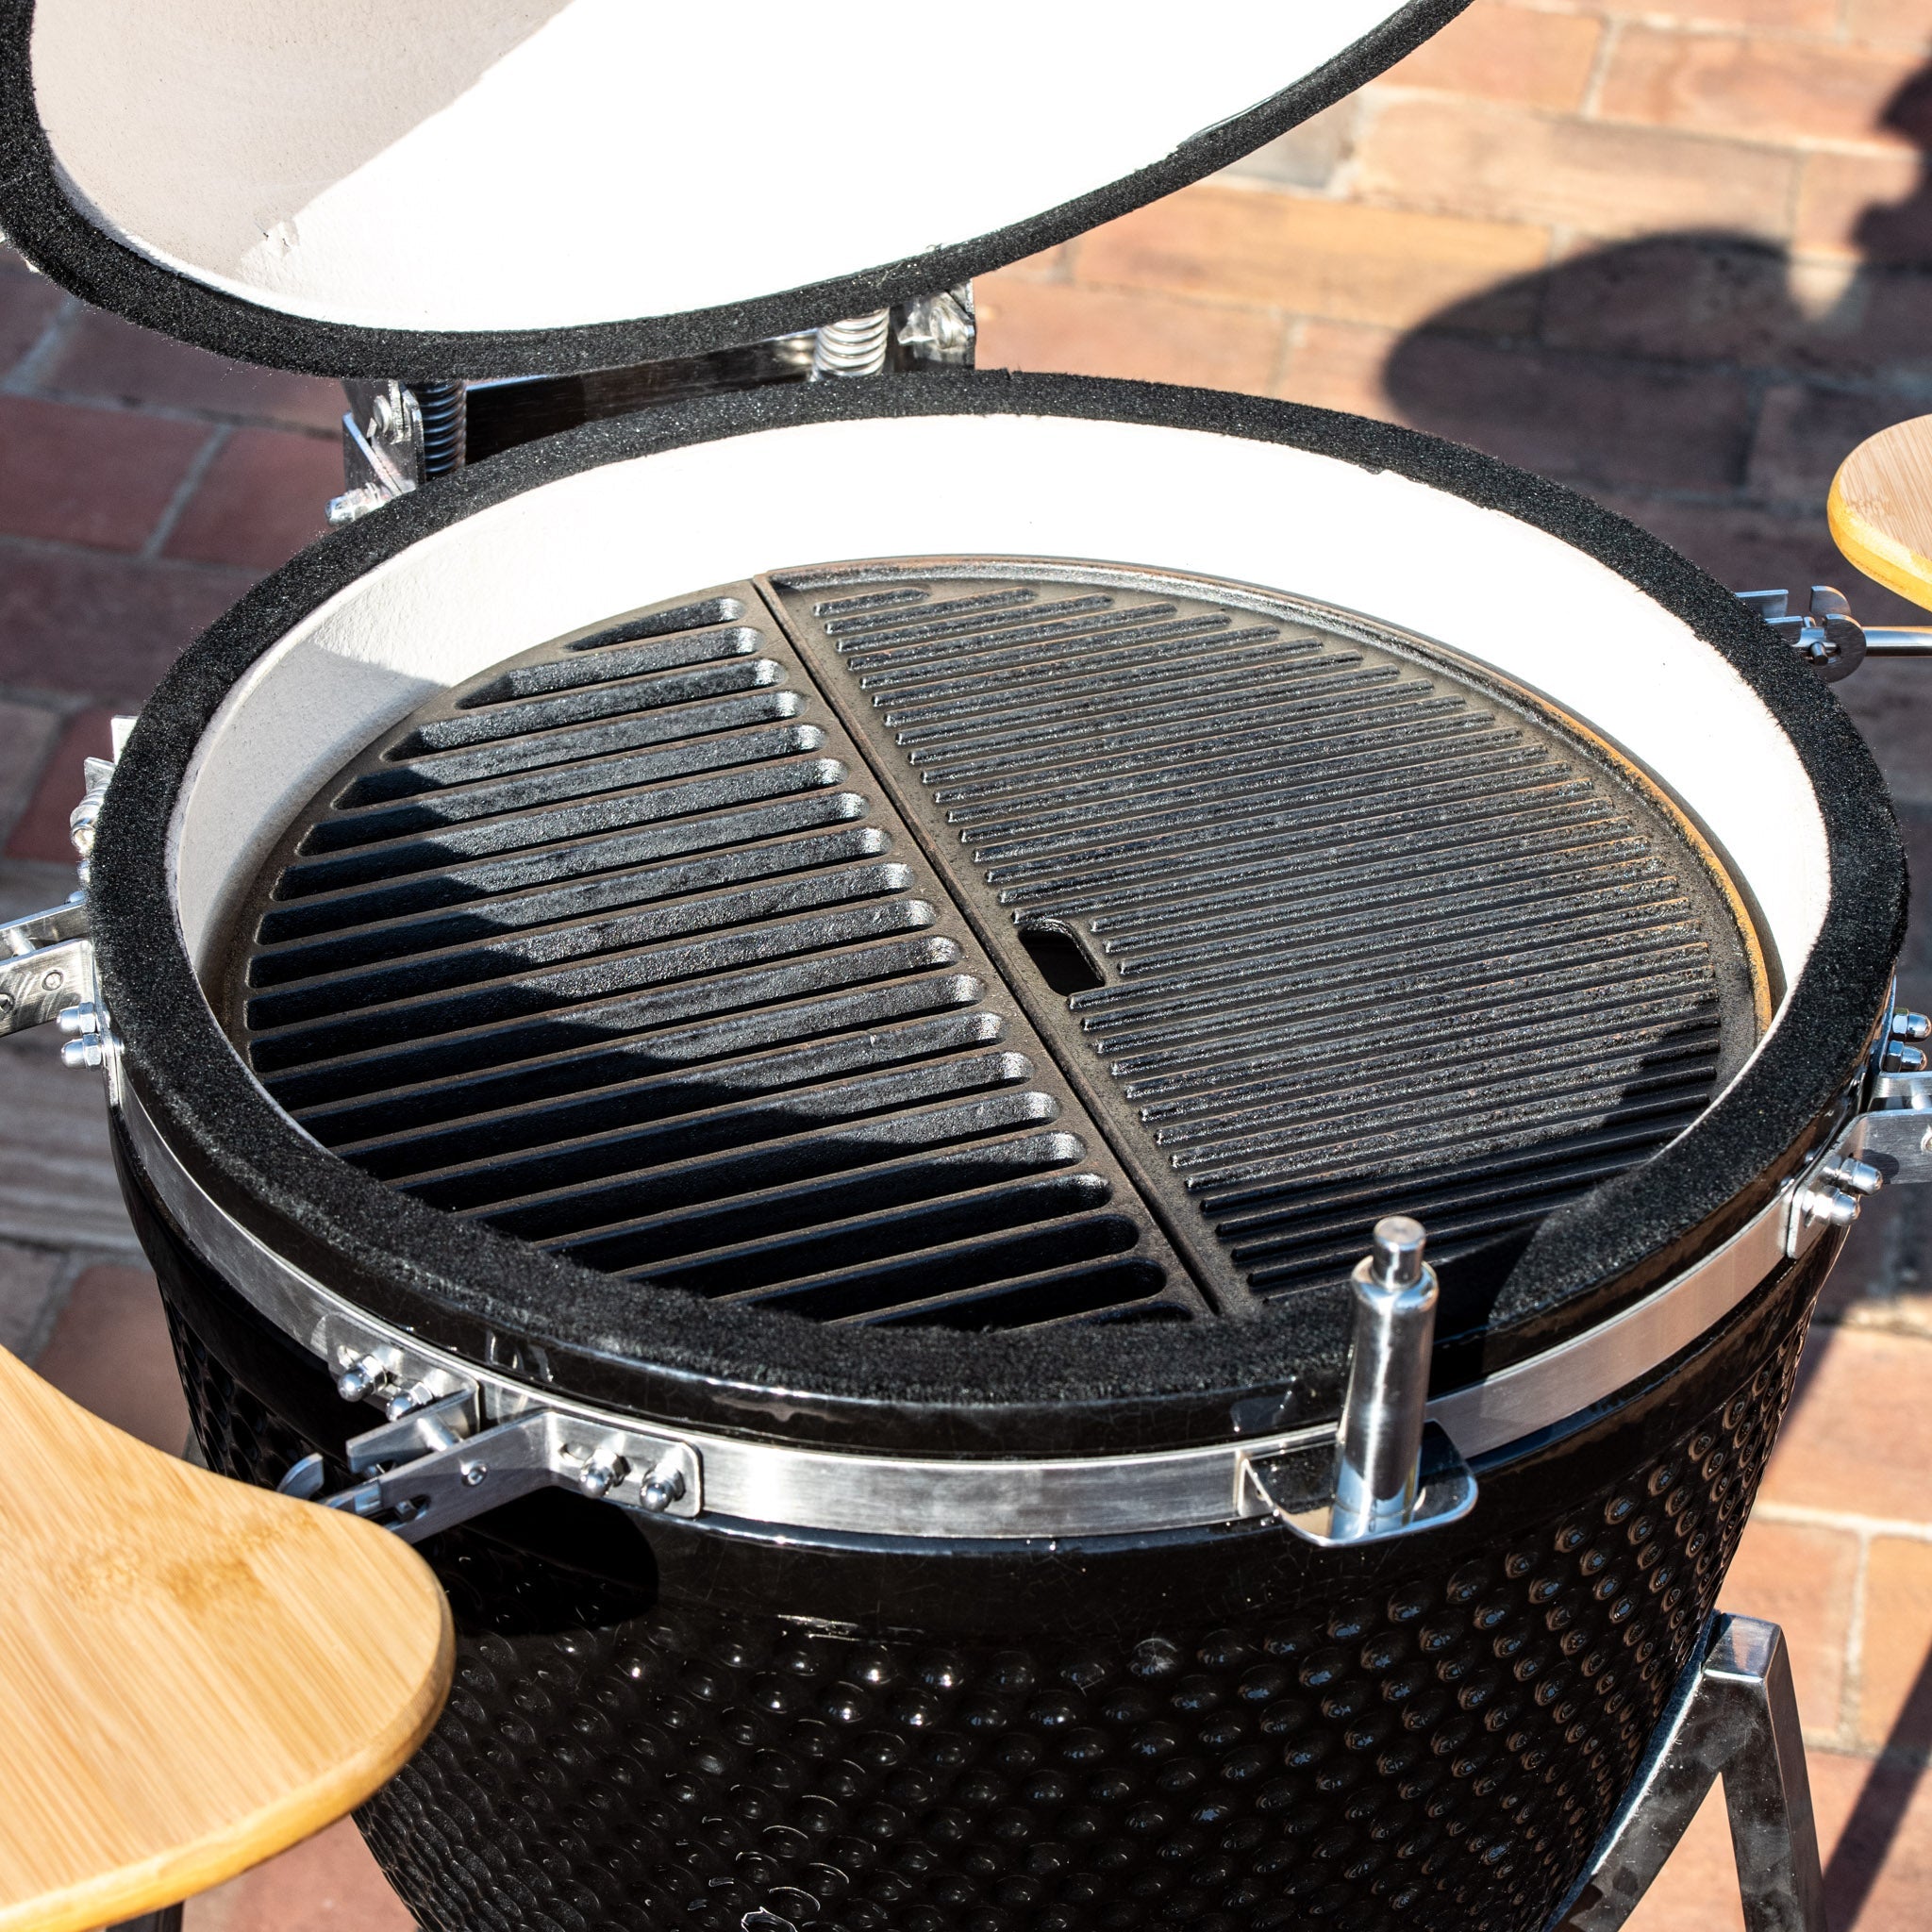 15% off Kamado Half Moon Cast Iron Griddle for 21